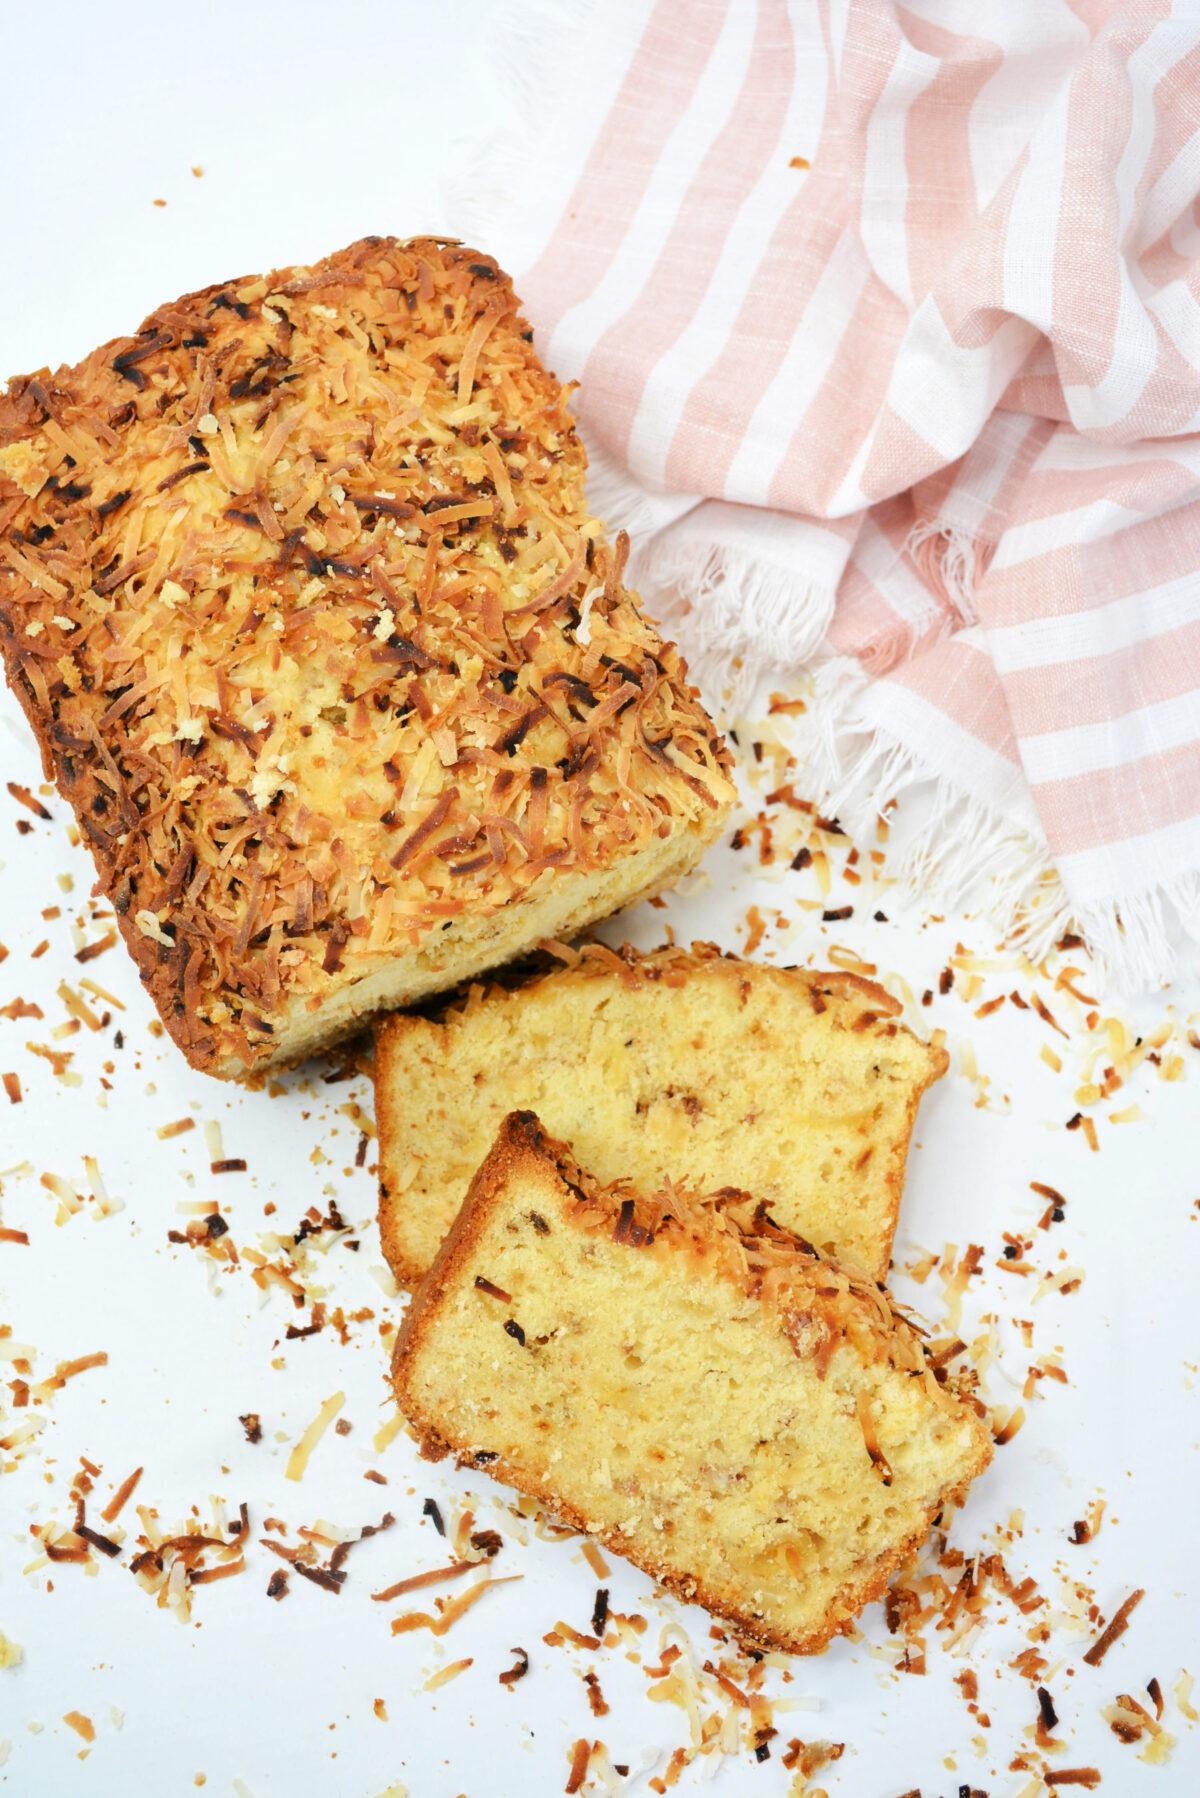 This delicious sweet pineapple coconut bread recipe is perfect for breakfast or dessert! It's loaded with toasted coconut and pineapple.